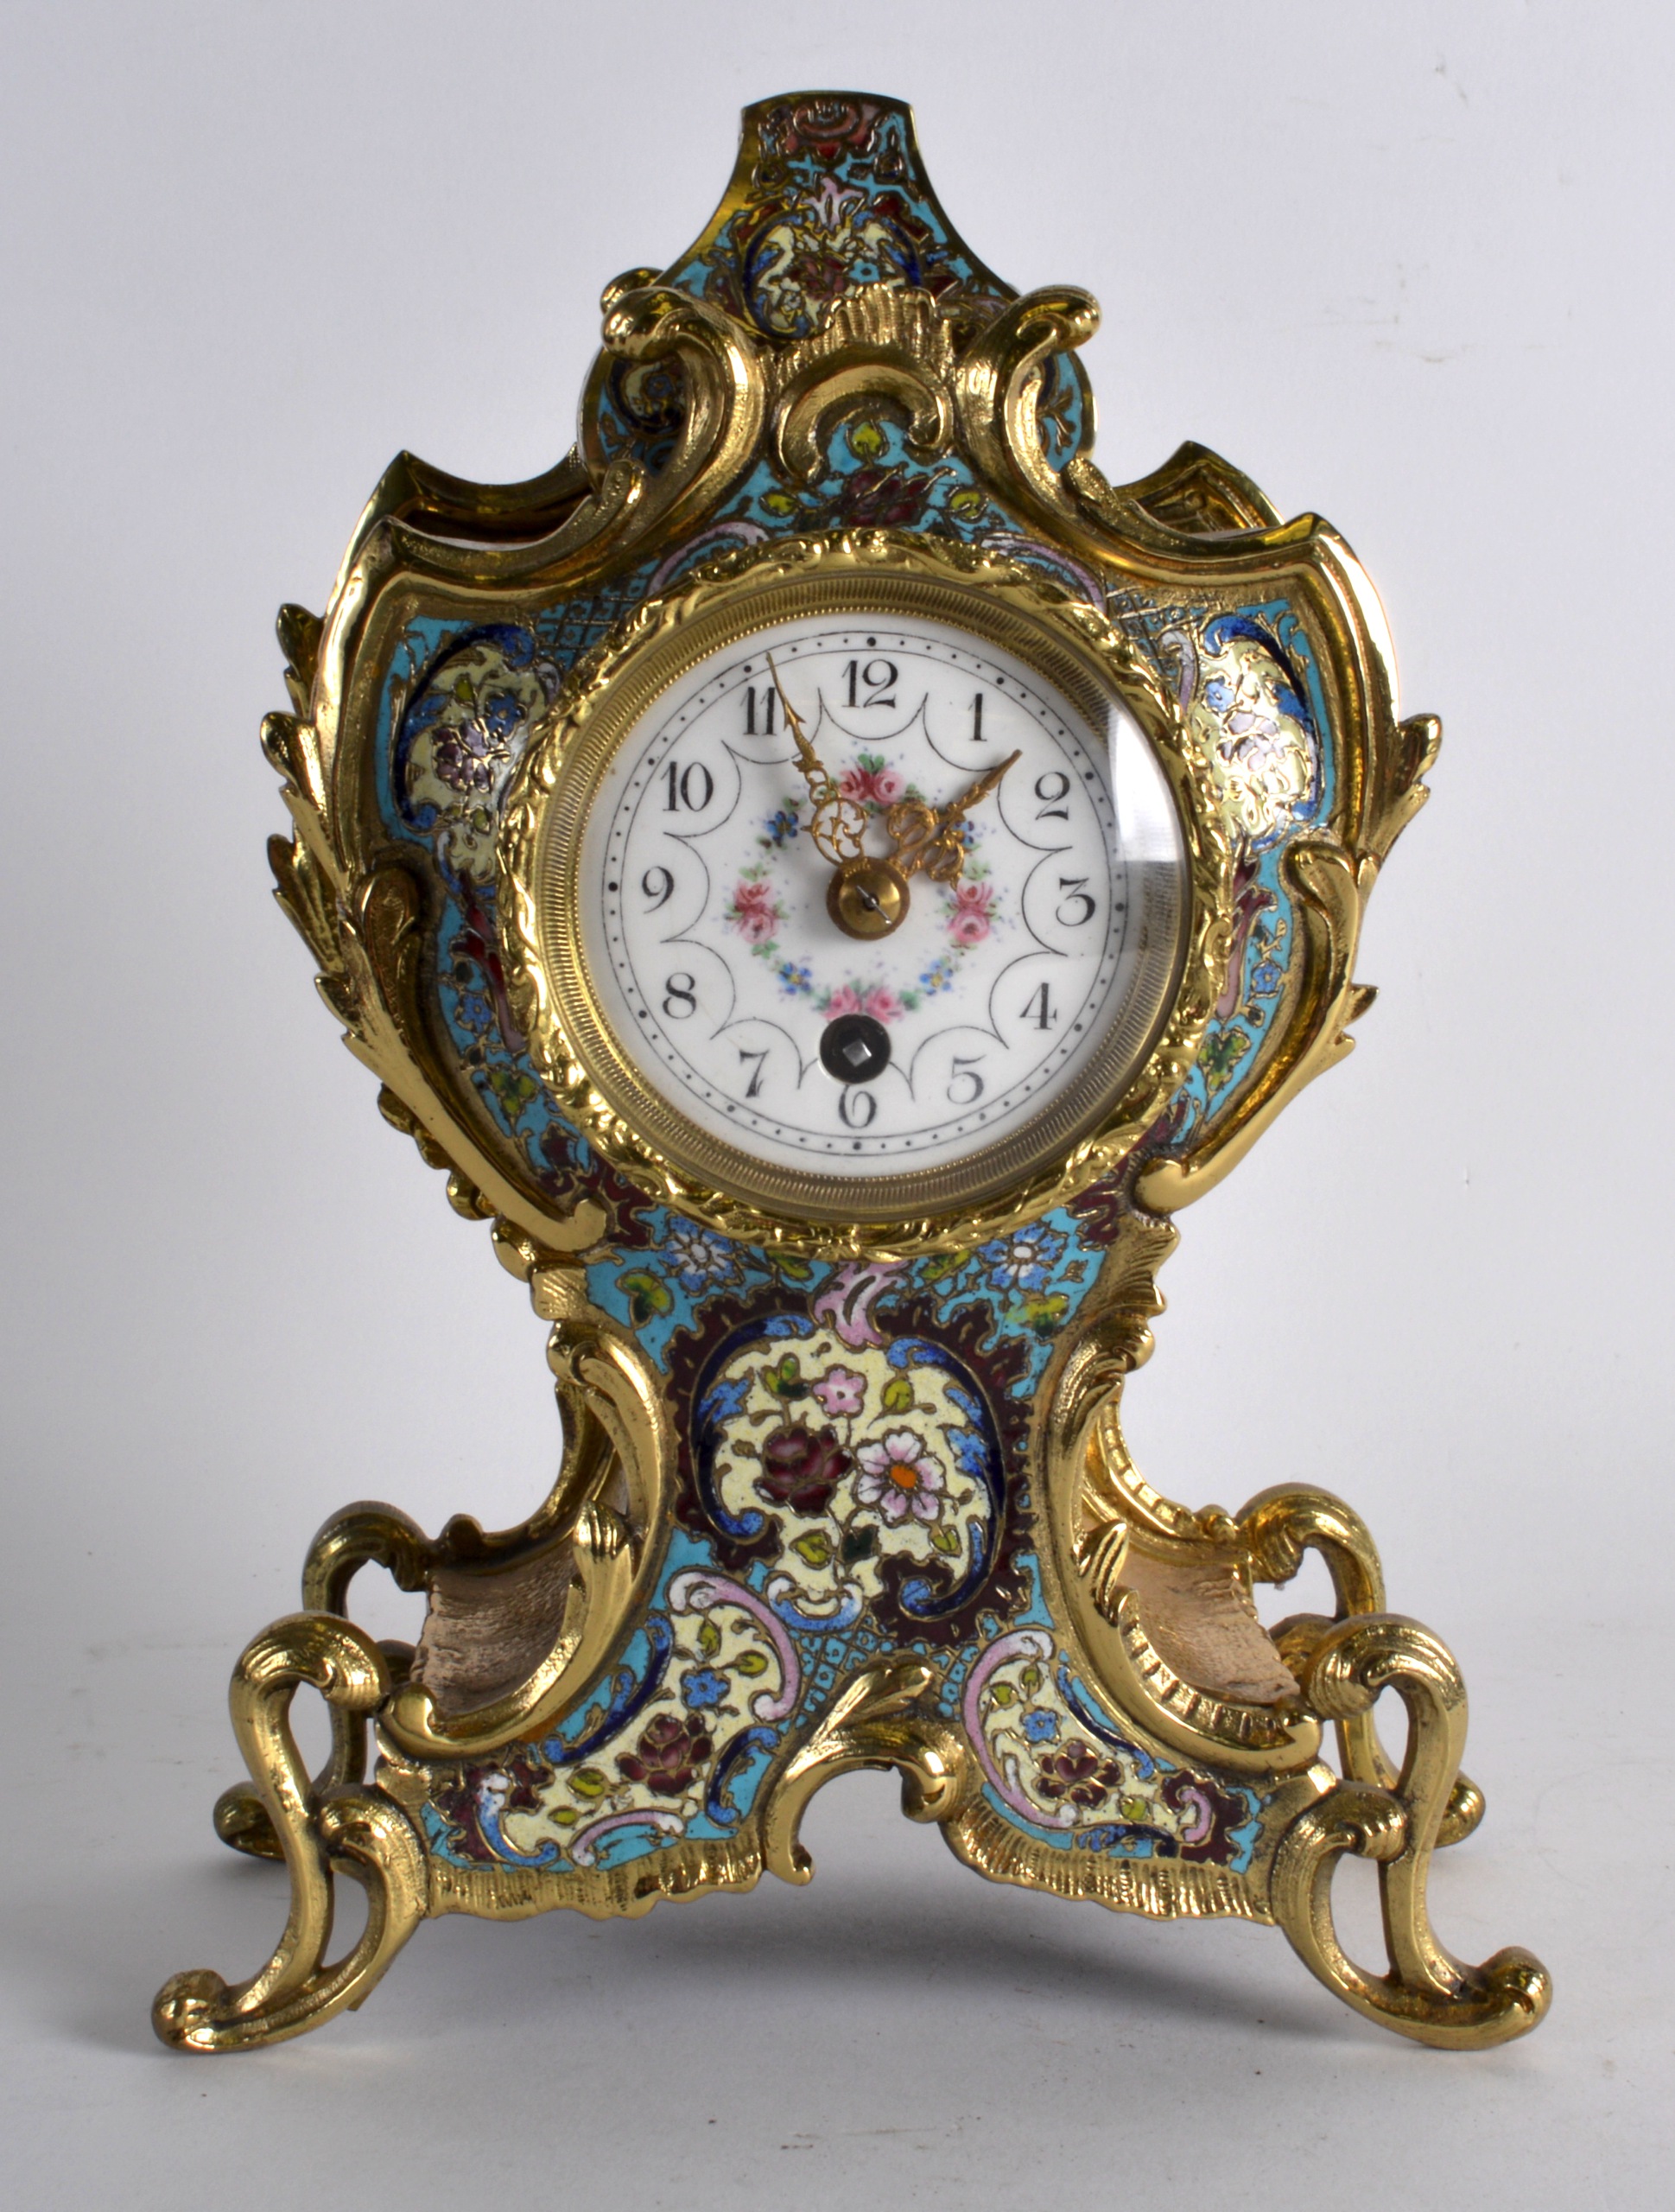 AN EARLY 20TH CENTURY FRENCH BRASS AND CHAMPLEVE ENAMEL MANTEL CLOCK with floral painted dial and